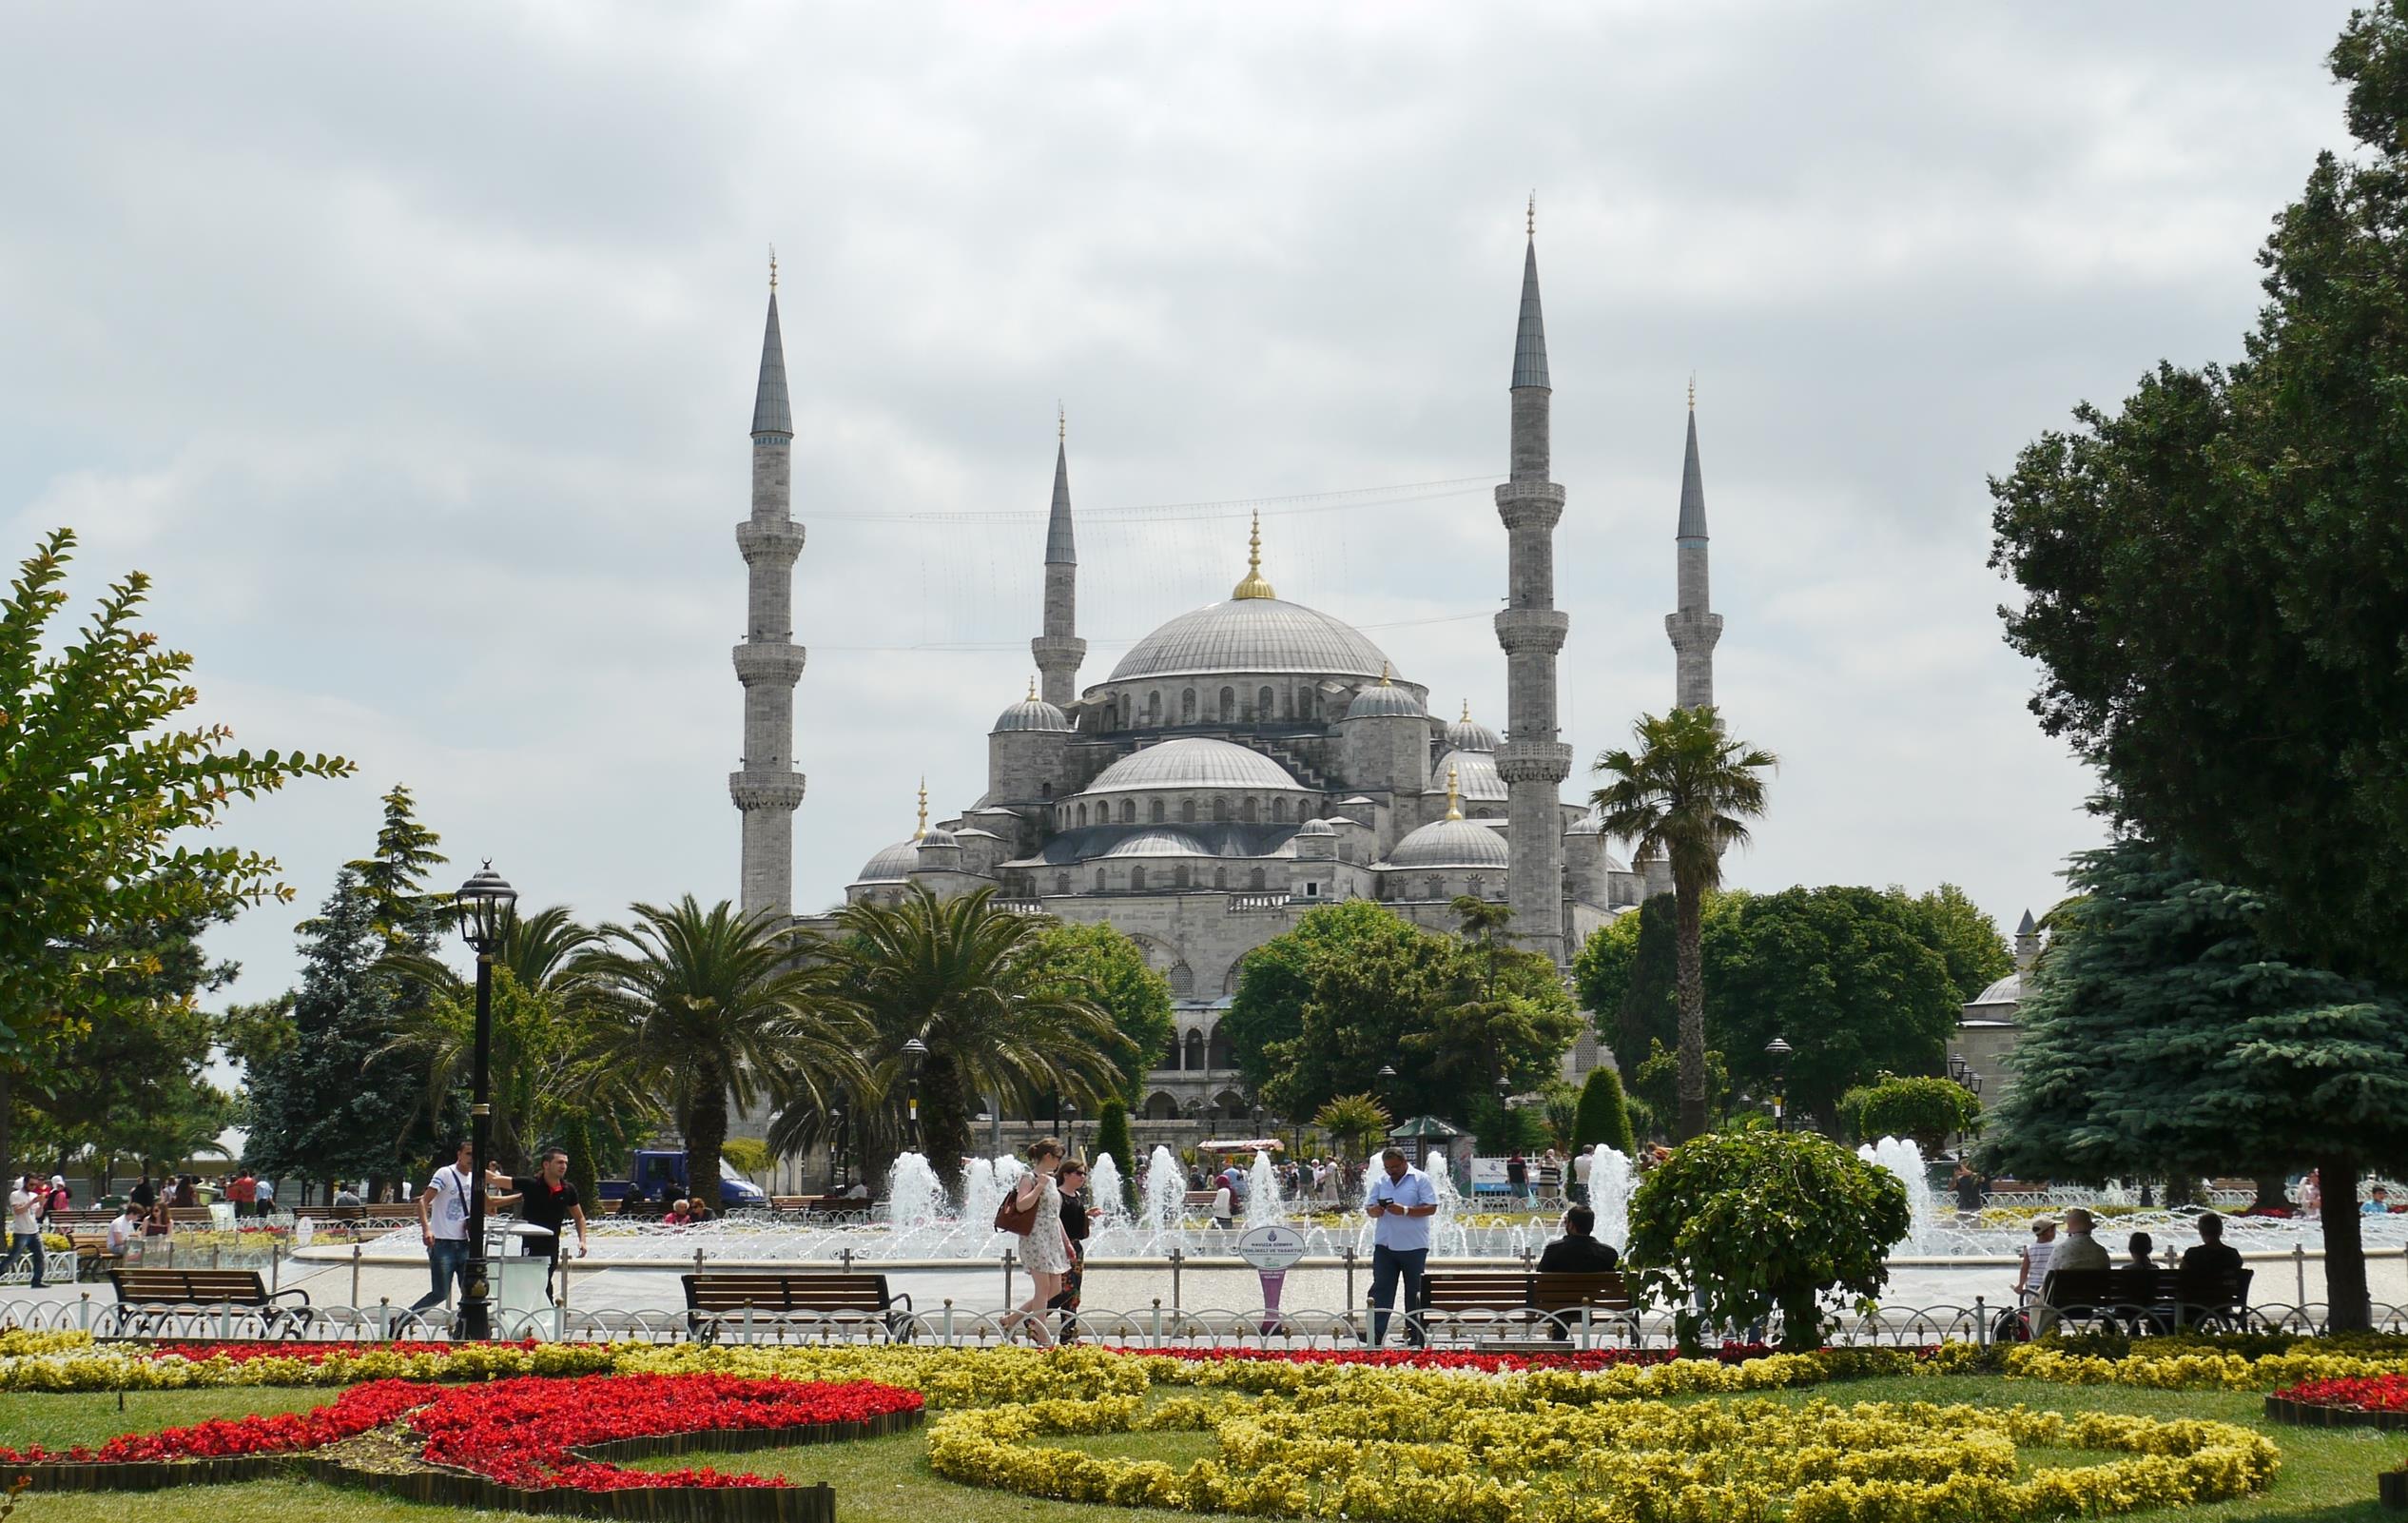 Sultan Ahmed Mosque (last one)